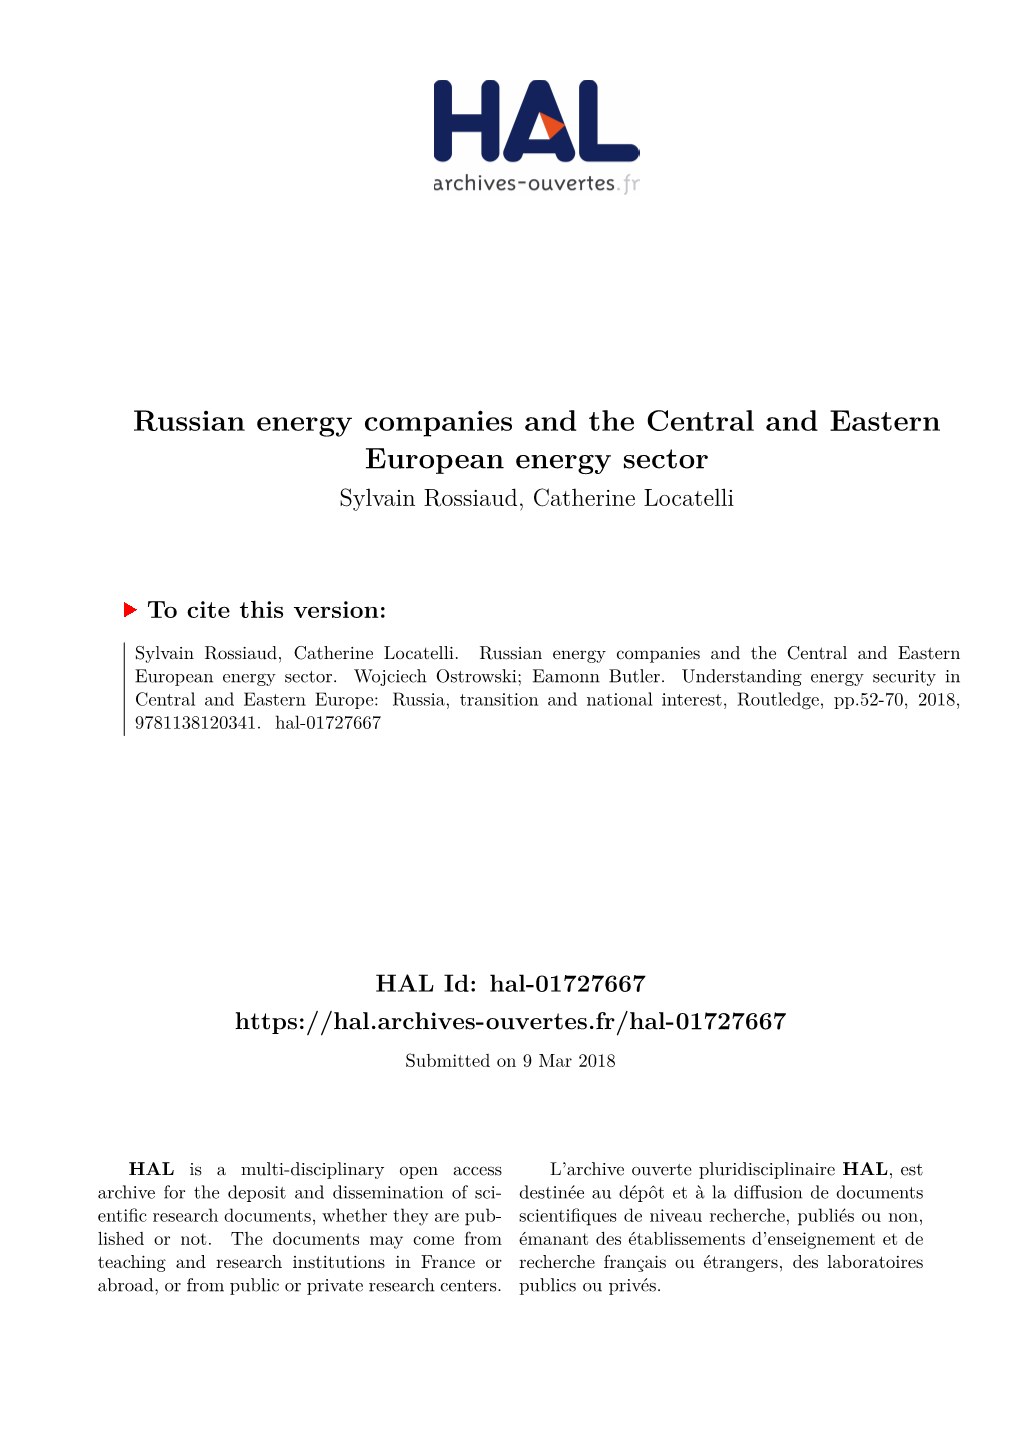 Russian Energy Companies and the Central and Eastern European Energy Sector Sylvain Rossiaud, Catherine Locatelli